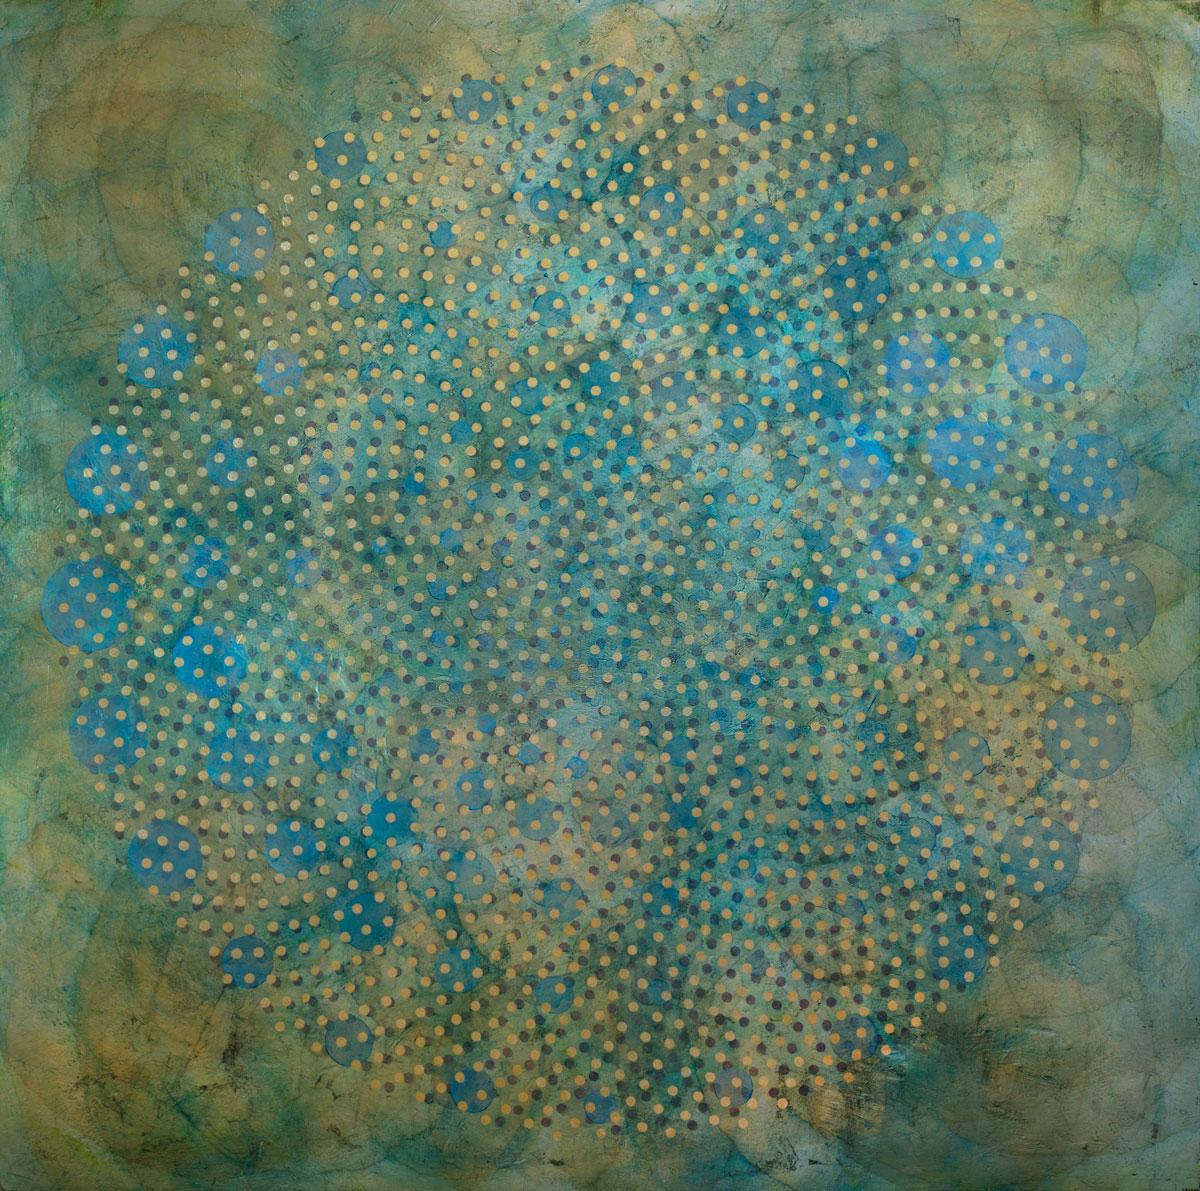 This abstract contemporary painting by Roger Mudre features a cool-toned palette with subtle gold accents and an iridescent quality. Concentric circles of varying sizes overlap one another to create a larger circle shape at the center of the